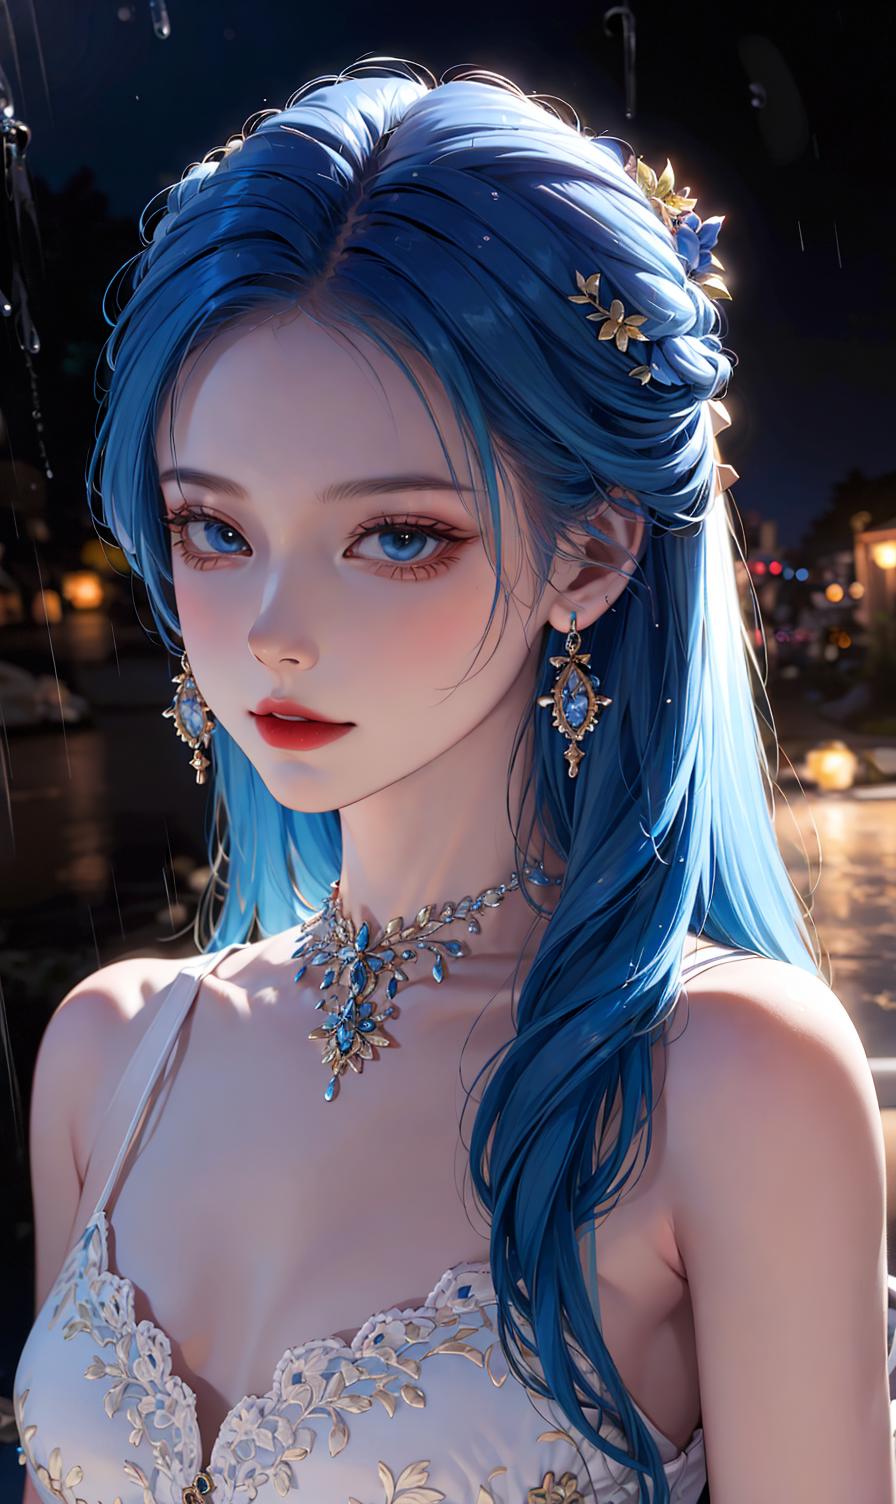 A beautifully drawn blue-haired woman wearing a blue necklace and earrings.